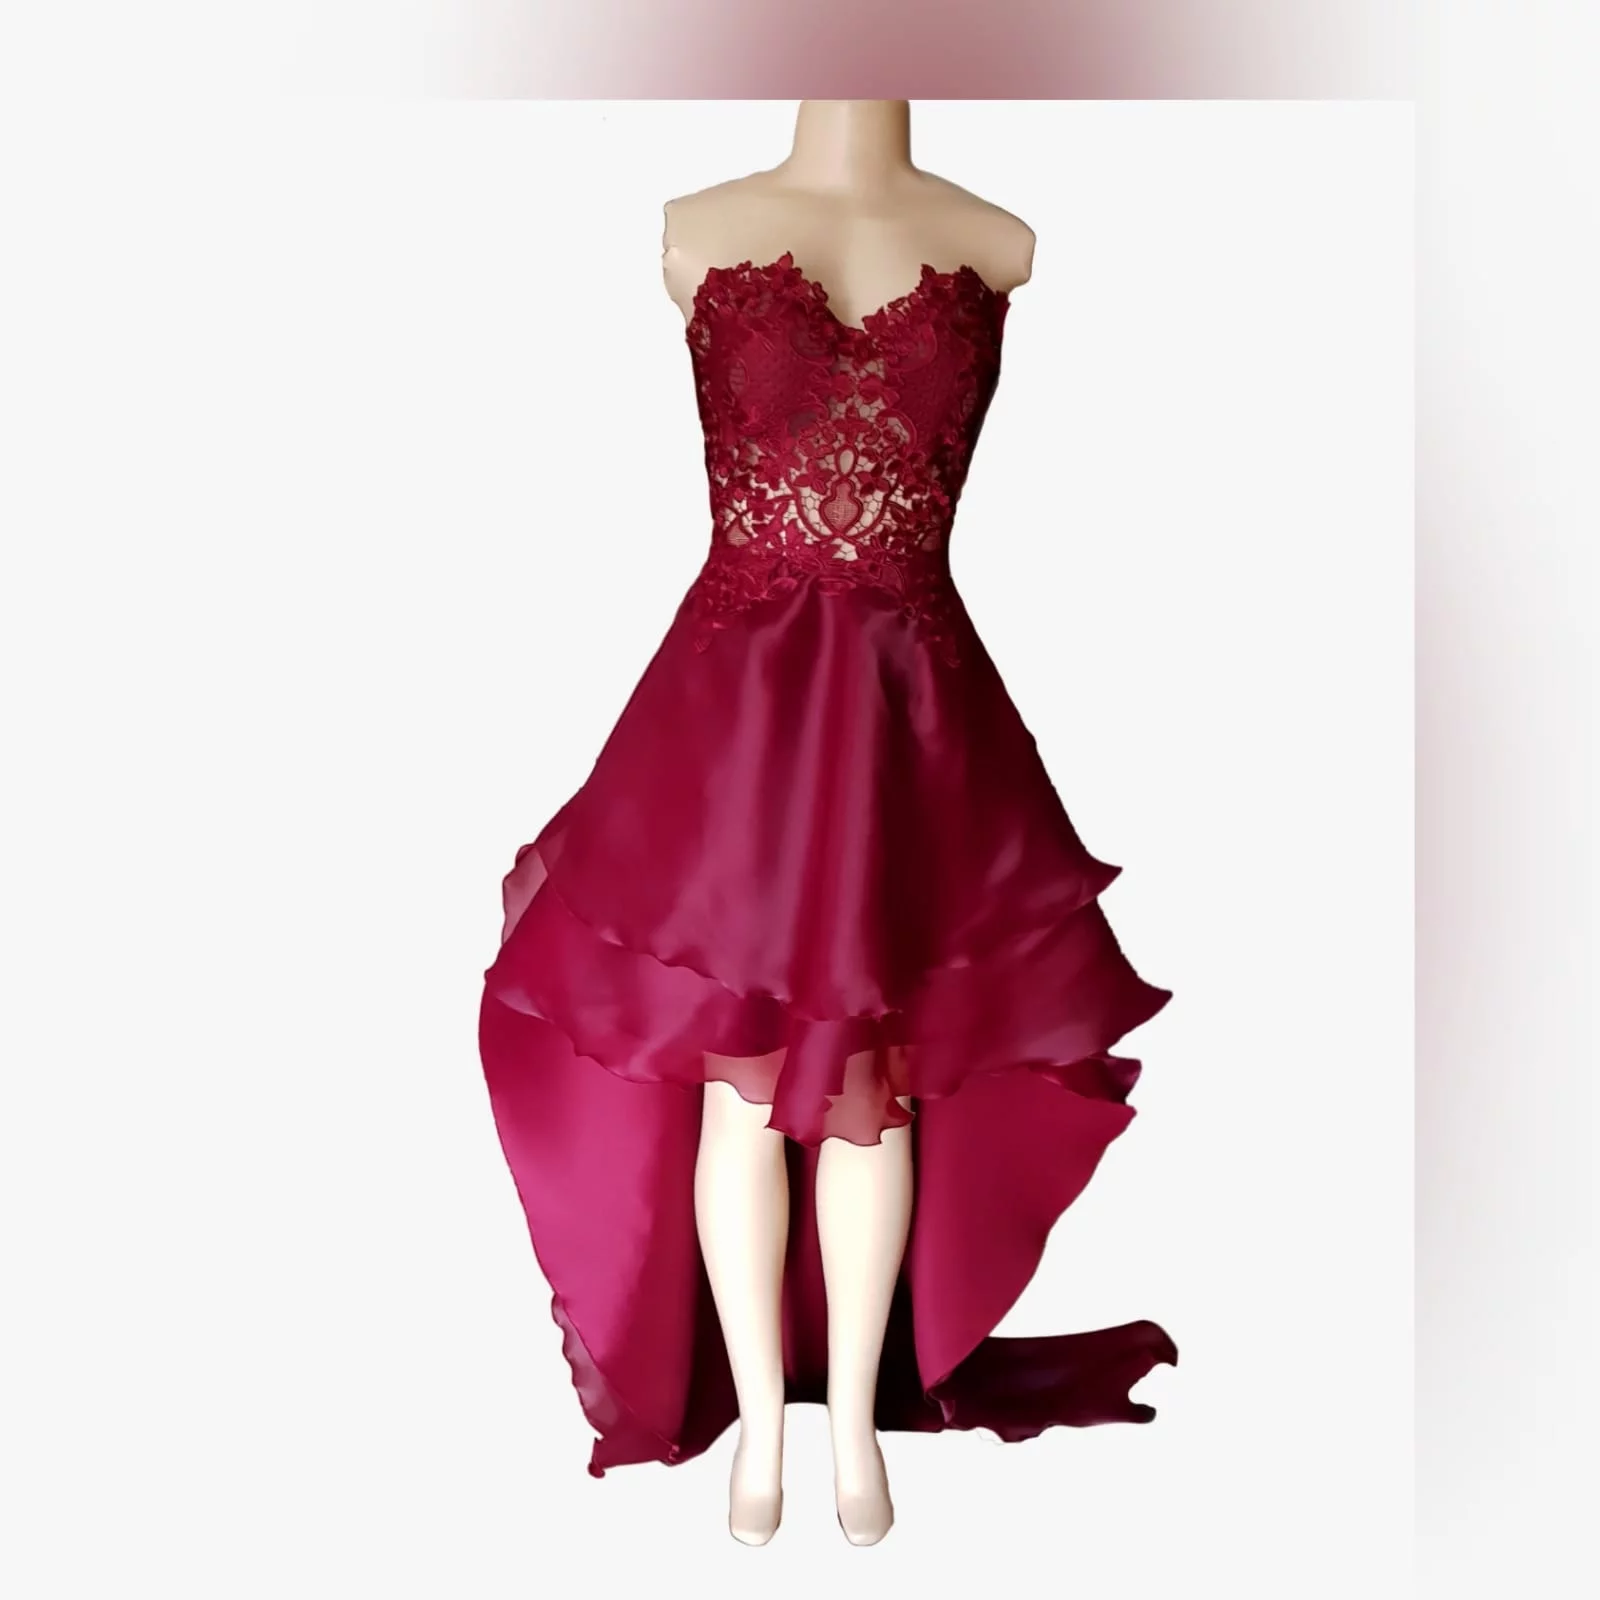 Dark red high low evening dress 7 the perfect dark red evening dress for your prom night if you want to look elegant yet adorable. With a lace bodice and a double layer hi - lo flowy bottom for a slight dramatic effect.